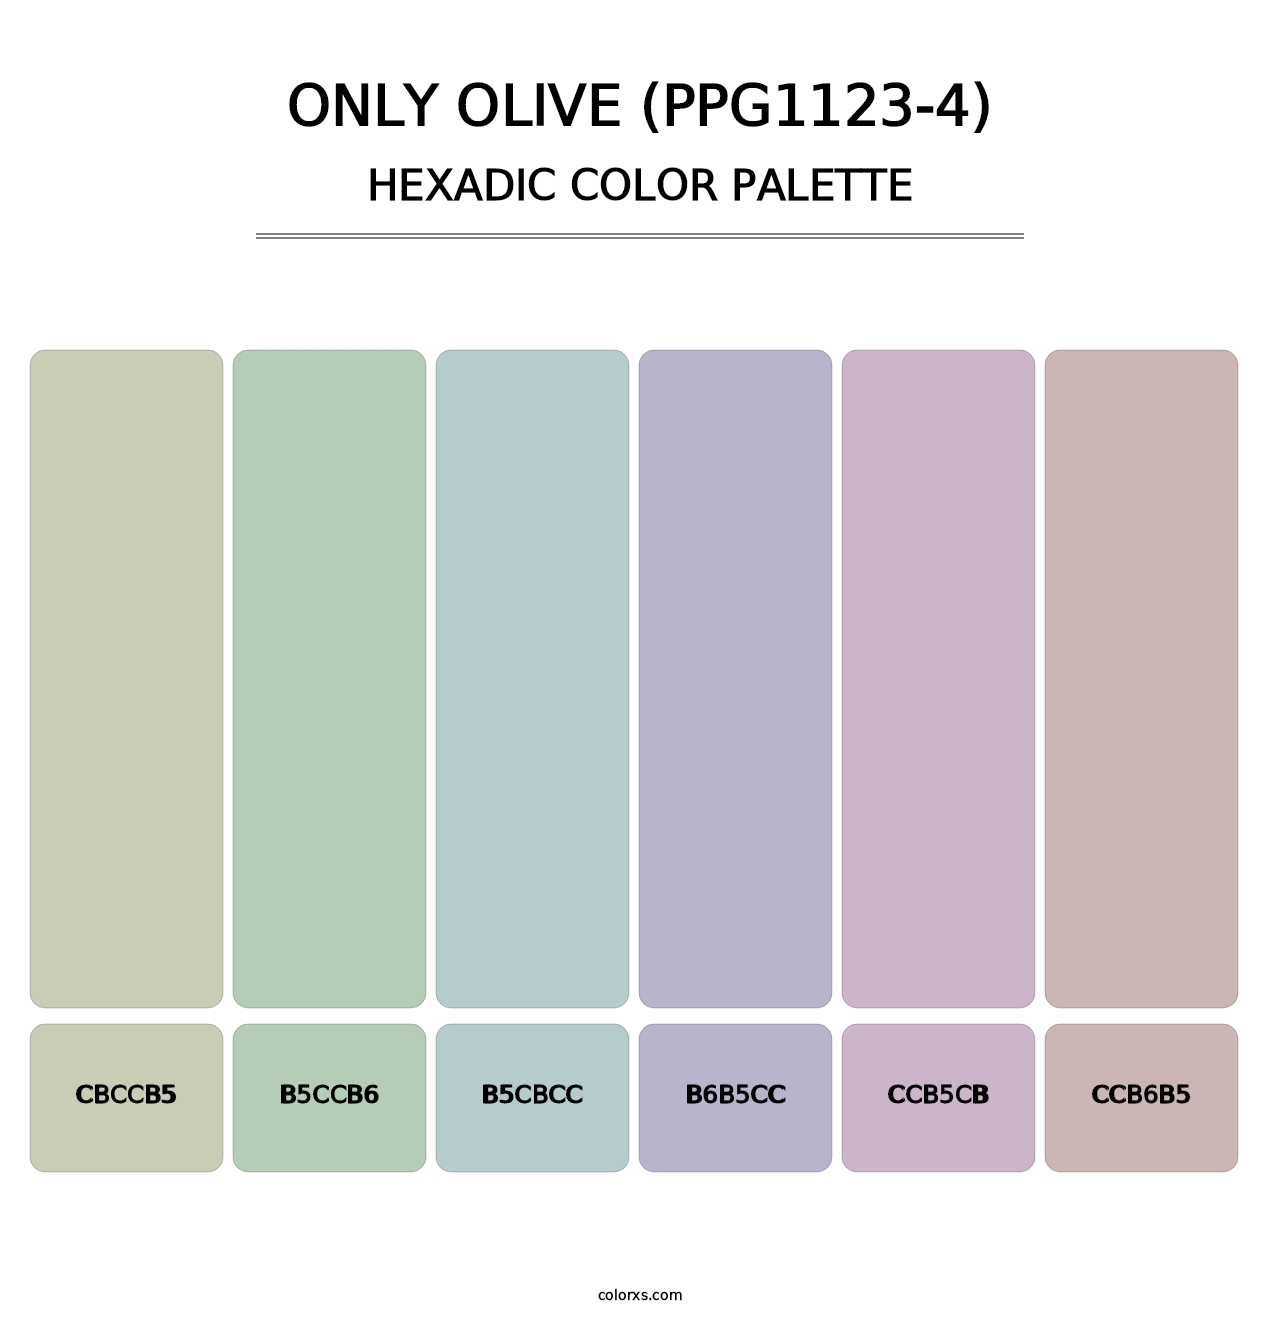 Only Olive (PPG1123-4) - Hexadic Color Palette